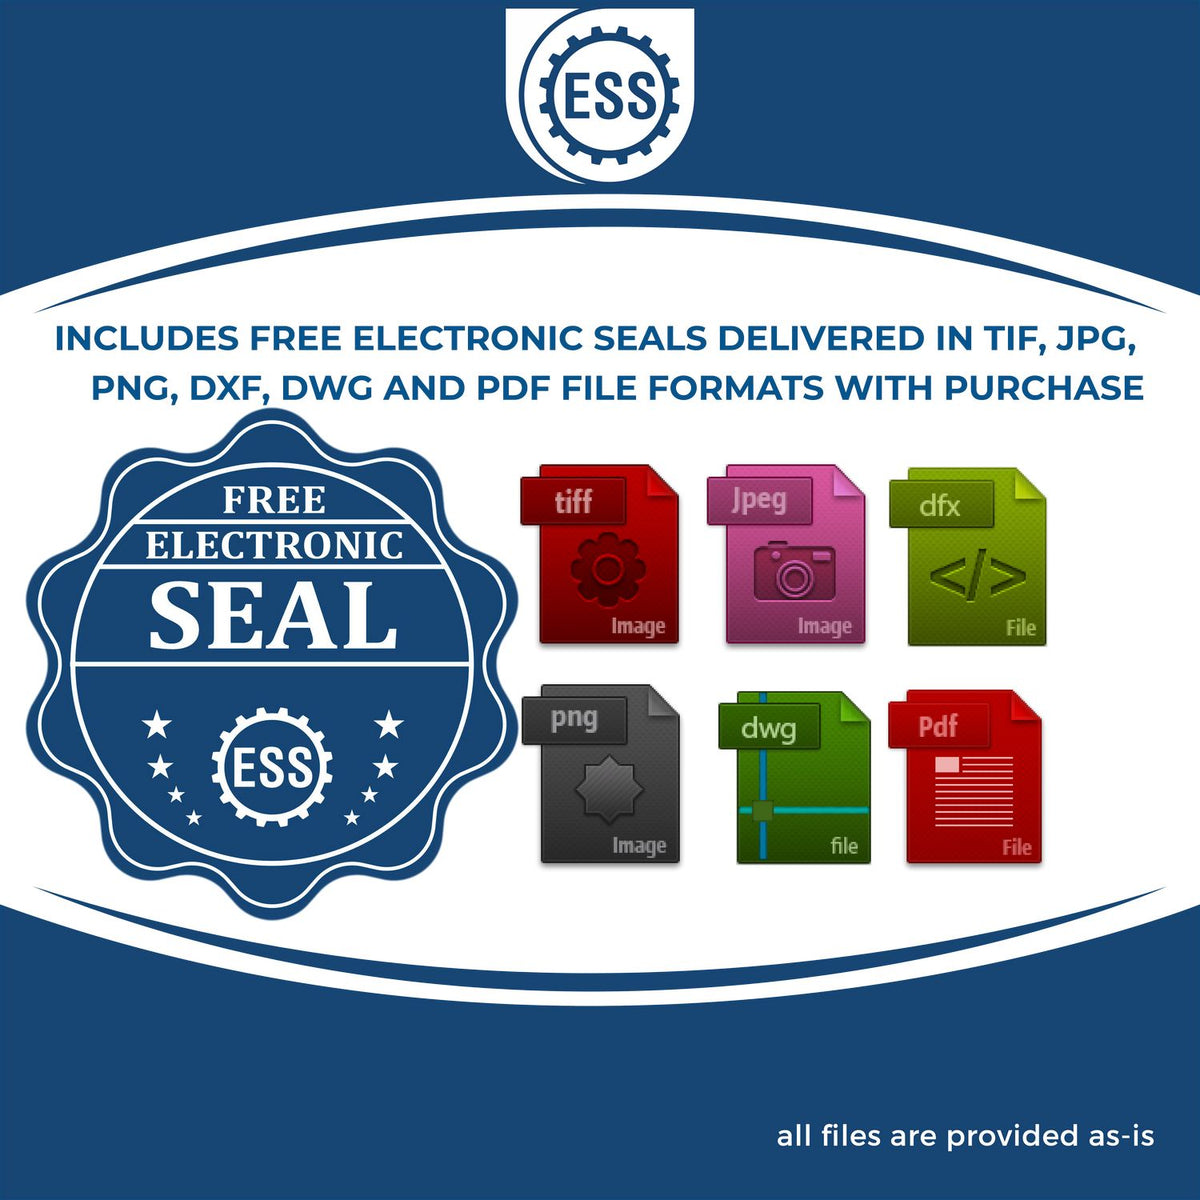 An infographic for the free electronic seal for the State of Montana Extended Long Reach Geologist Seal illustrating the different file type icons such as DXF, DWG, TIF, JPG and PNG.